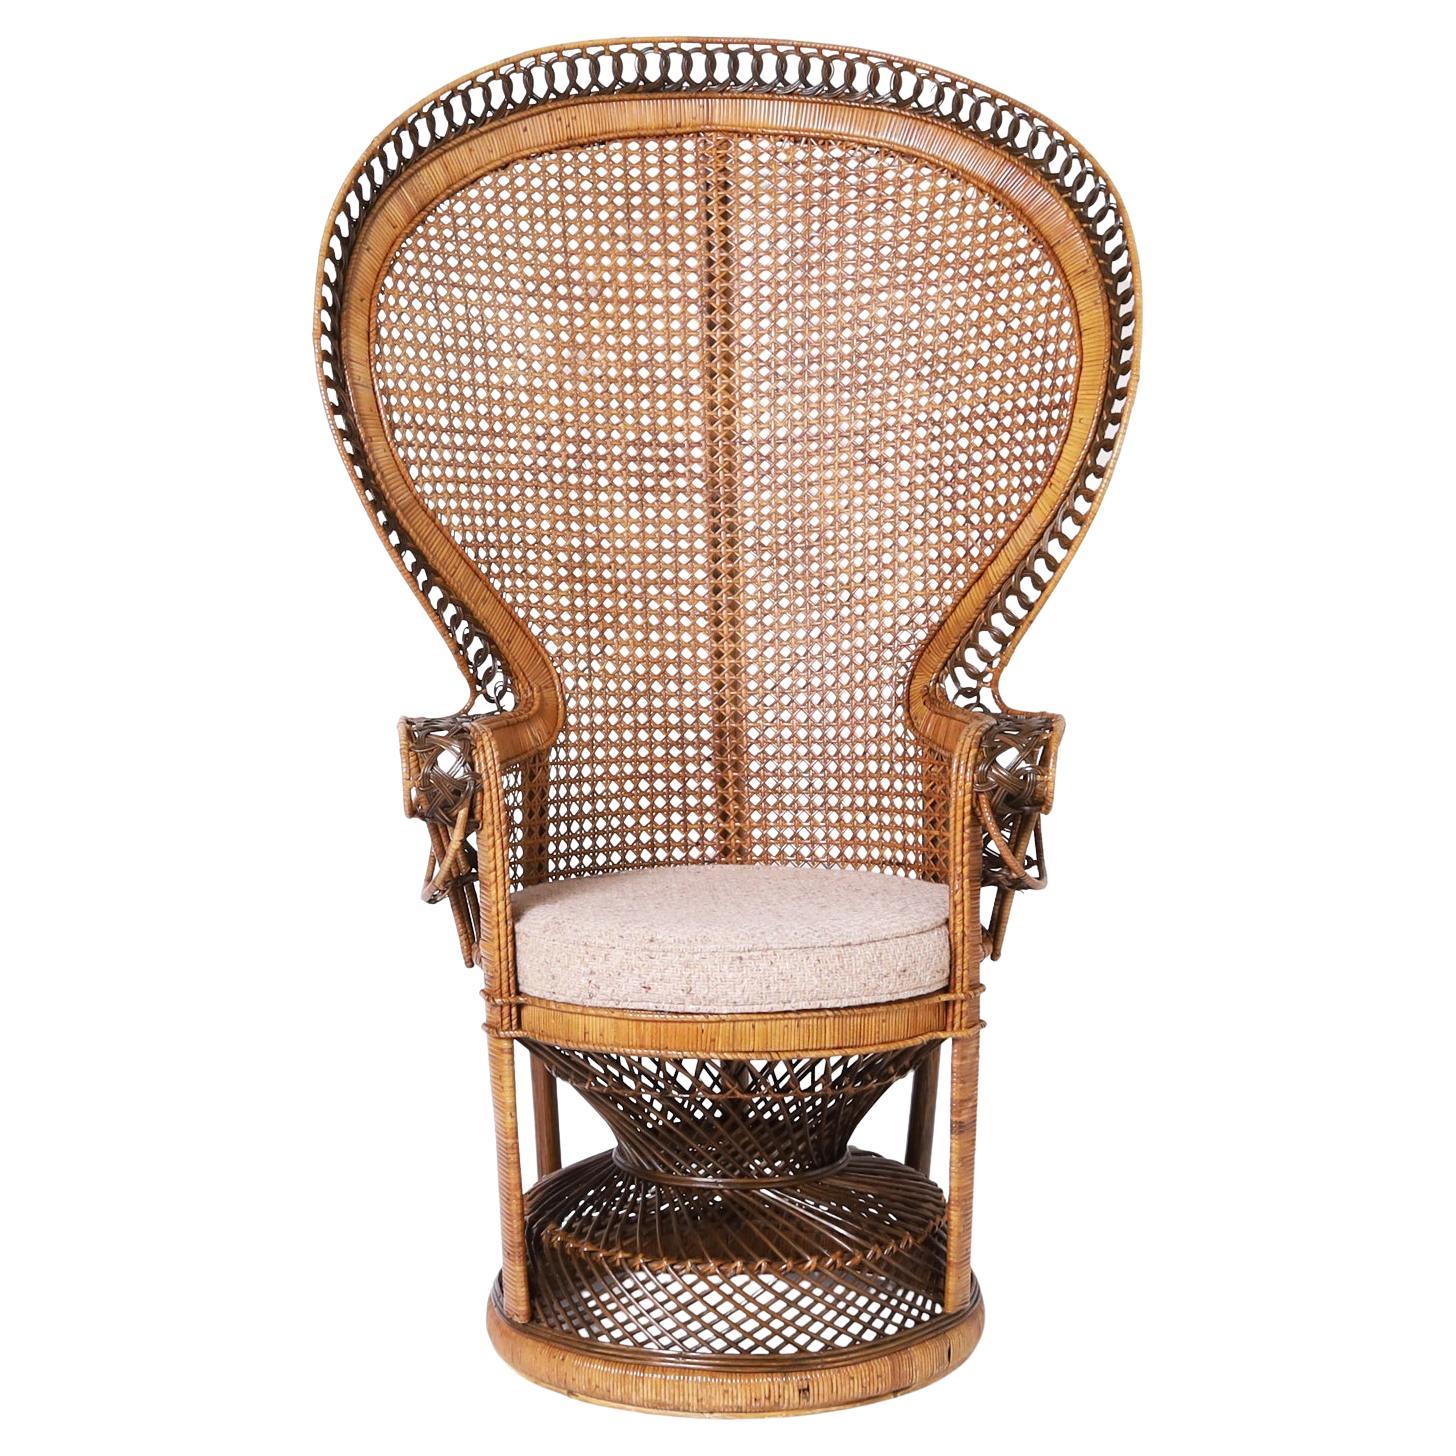 Anglo Indian Wicker and Rattan Peacock Chair